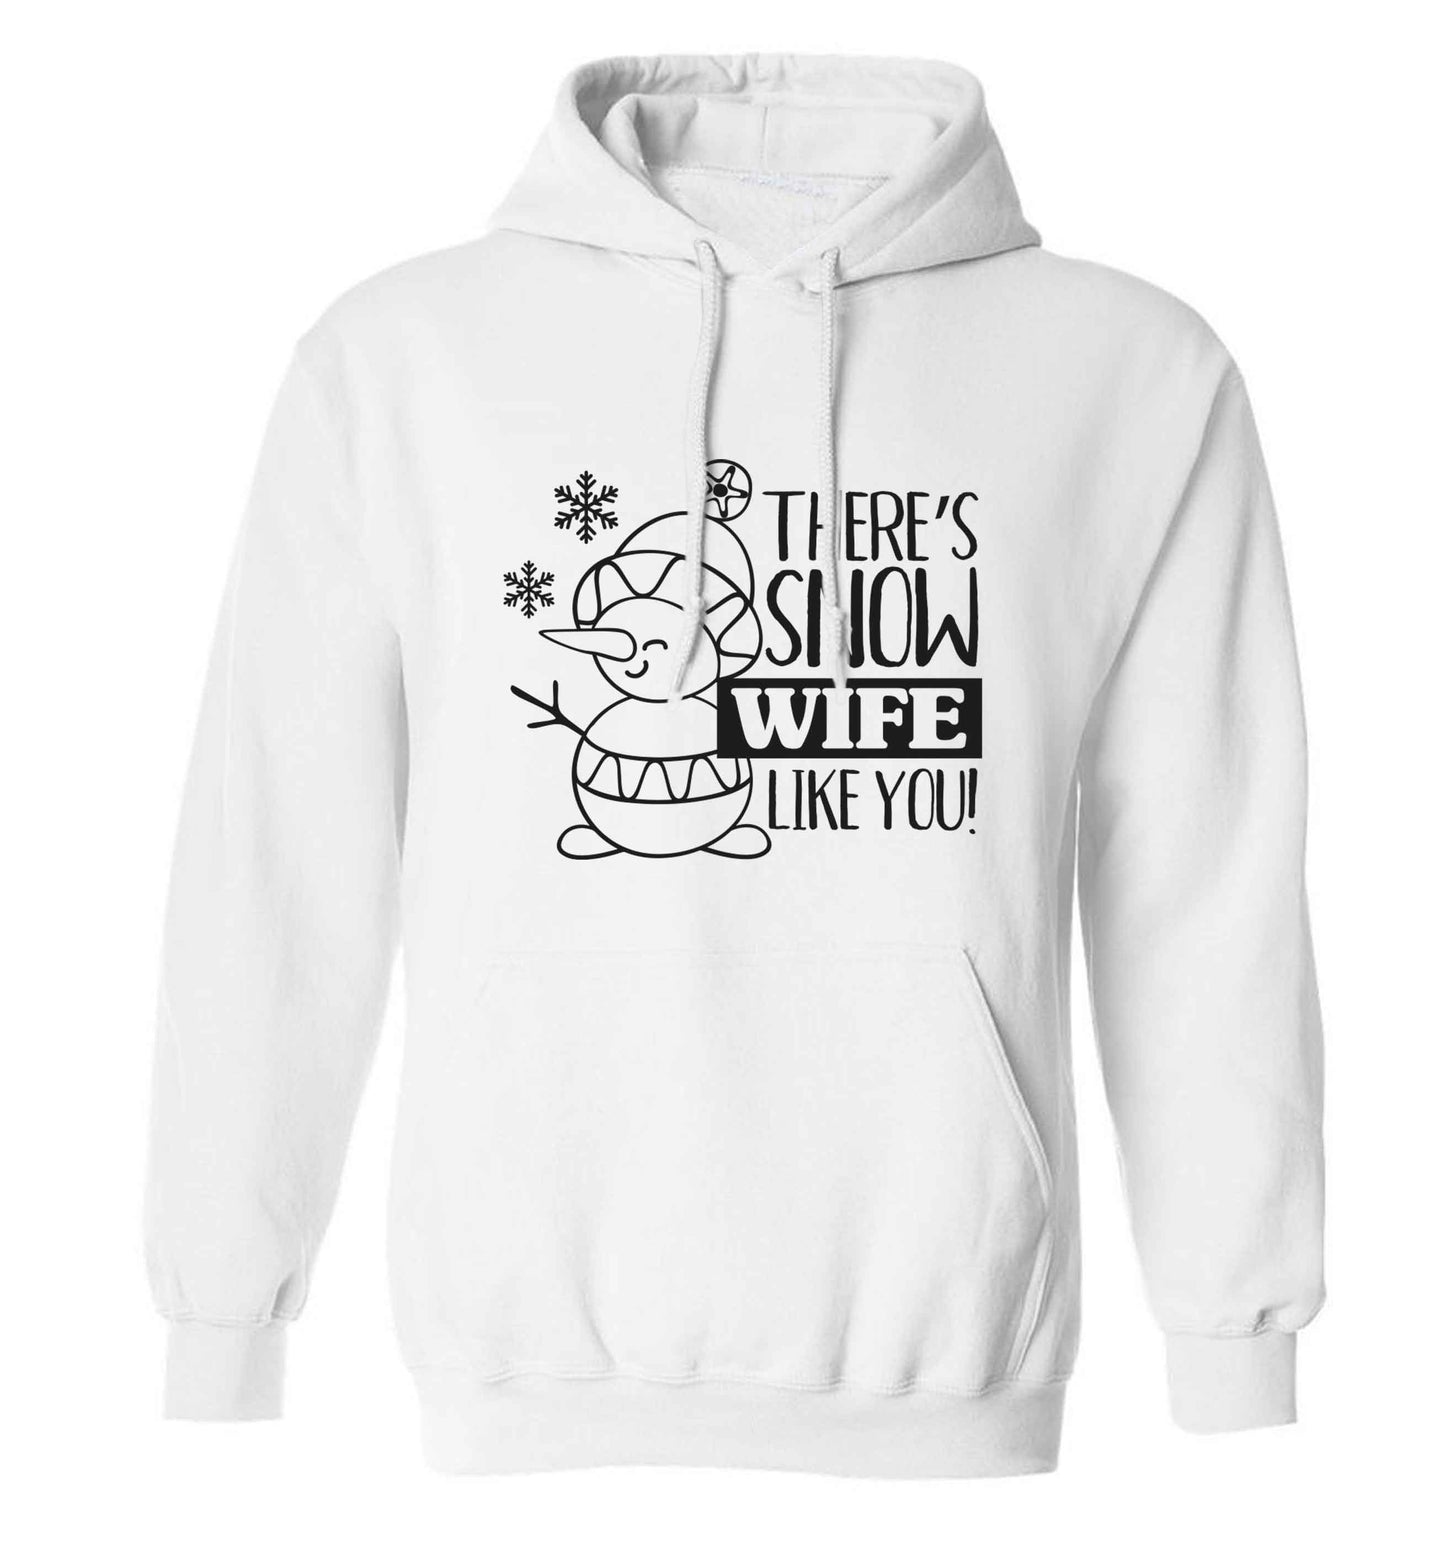 There's snow wife like you adults unisex white hoodie 2XL